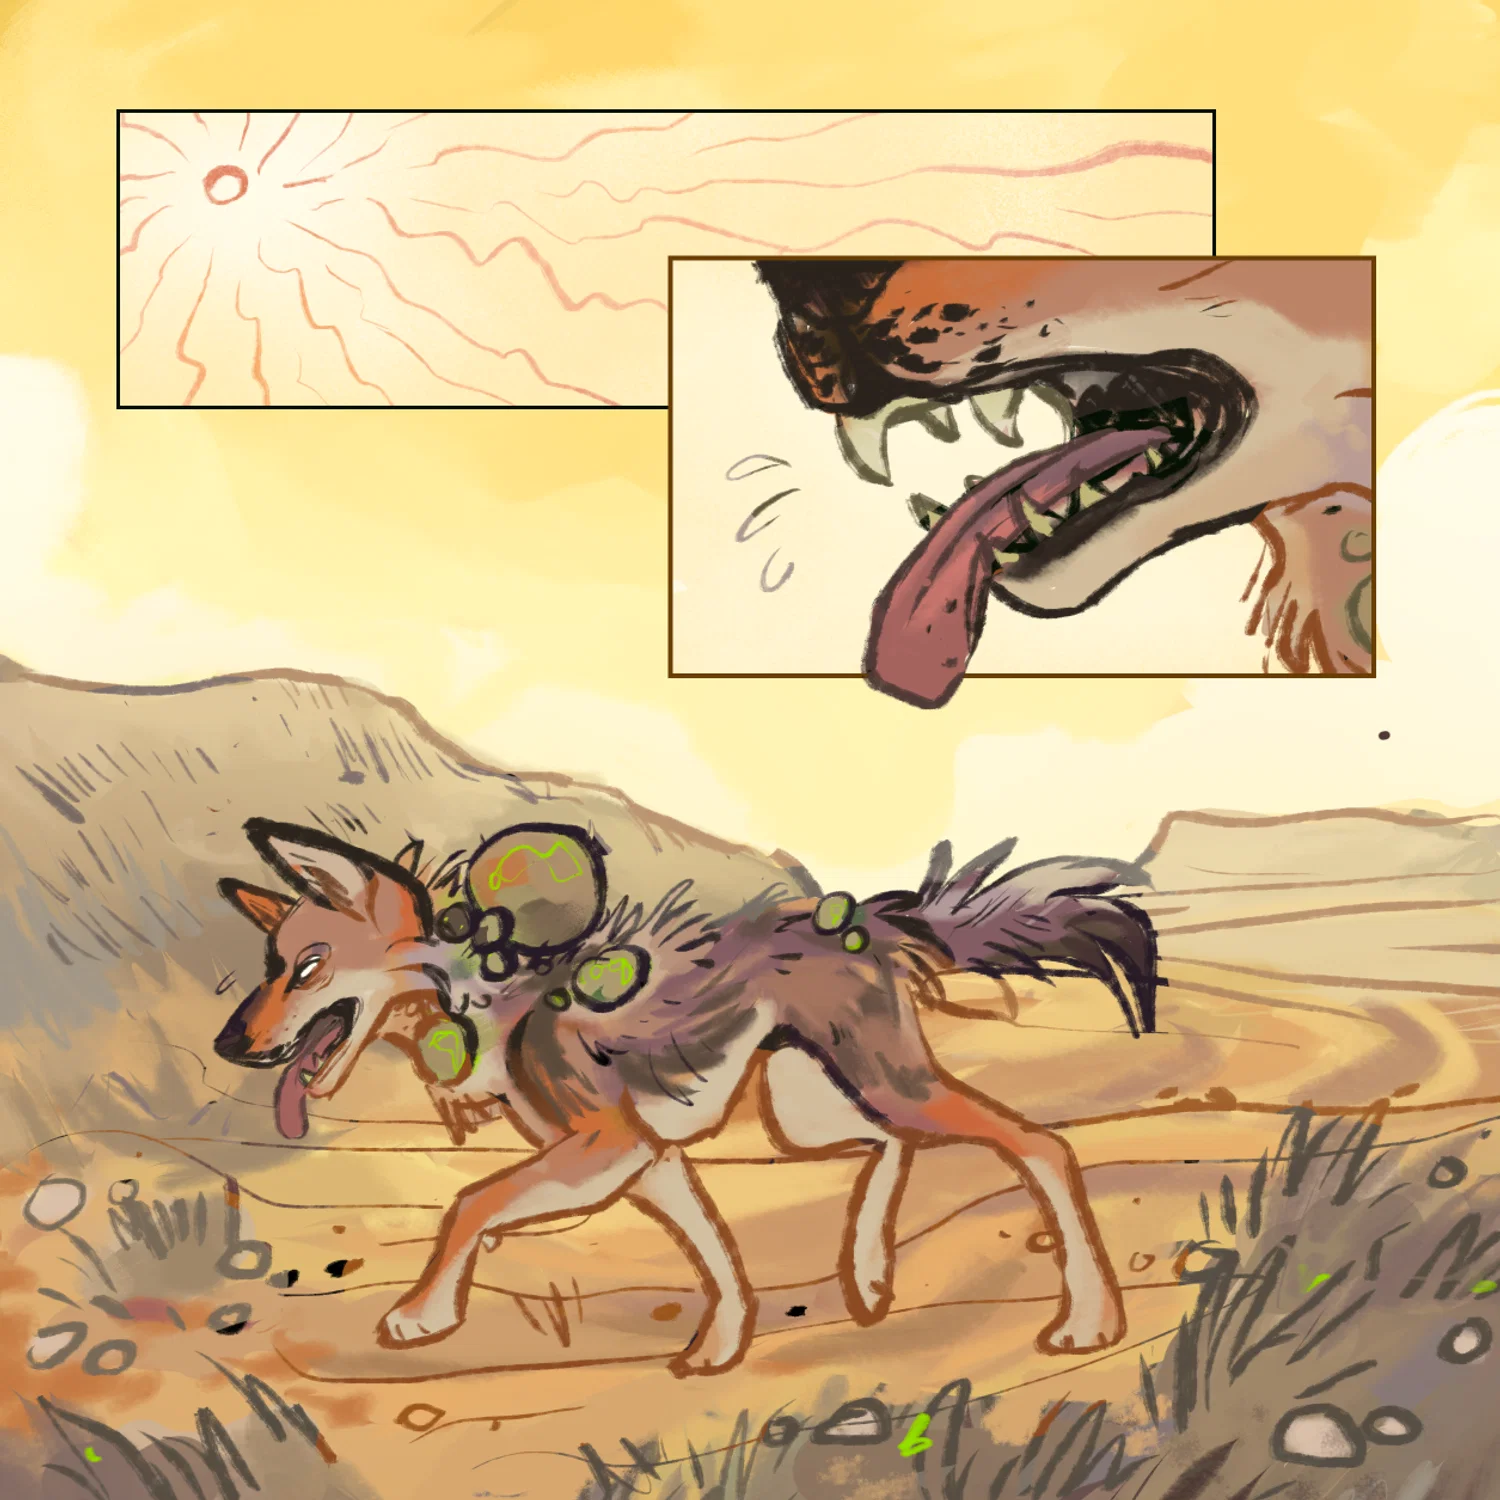 A comic page showing a coyote, covered in sickly green tumors, panting as it crosses a desert landscape.